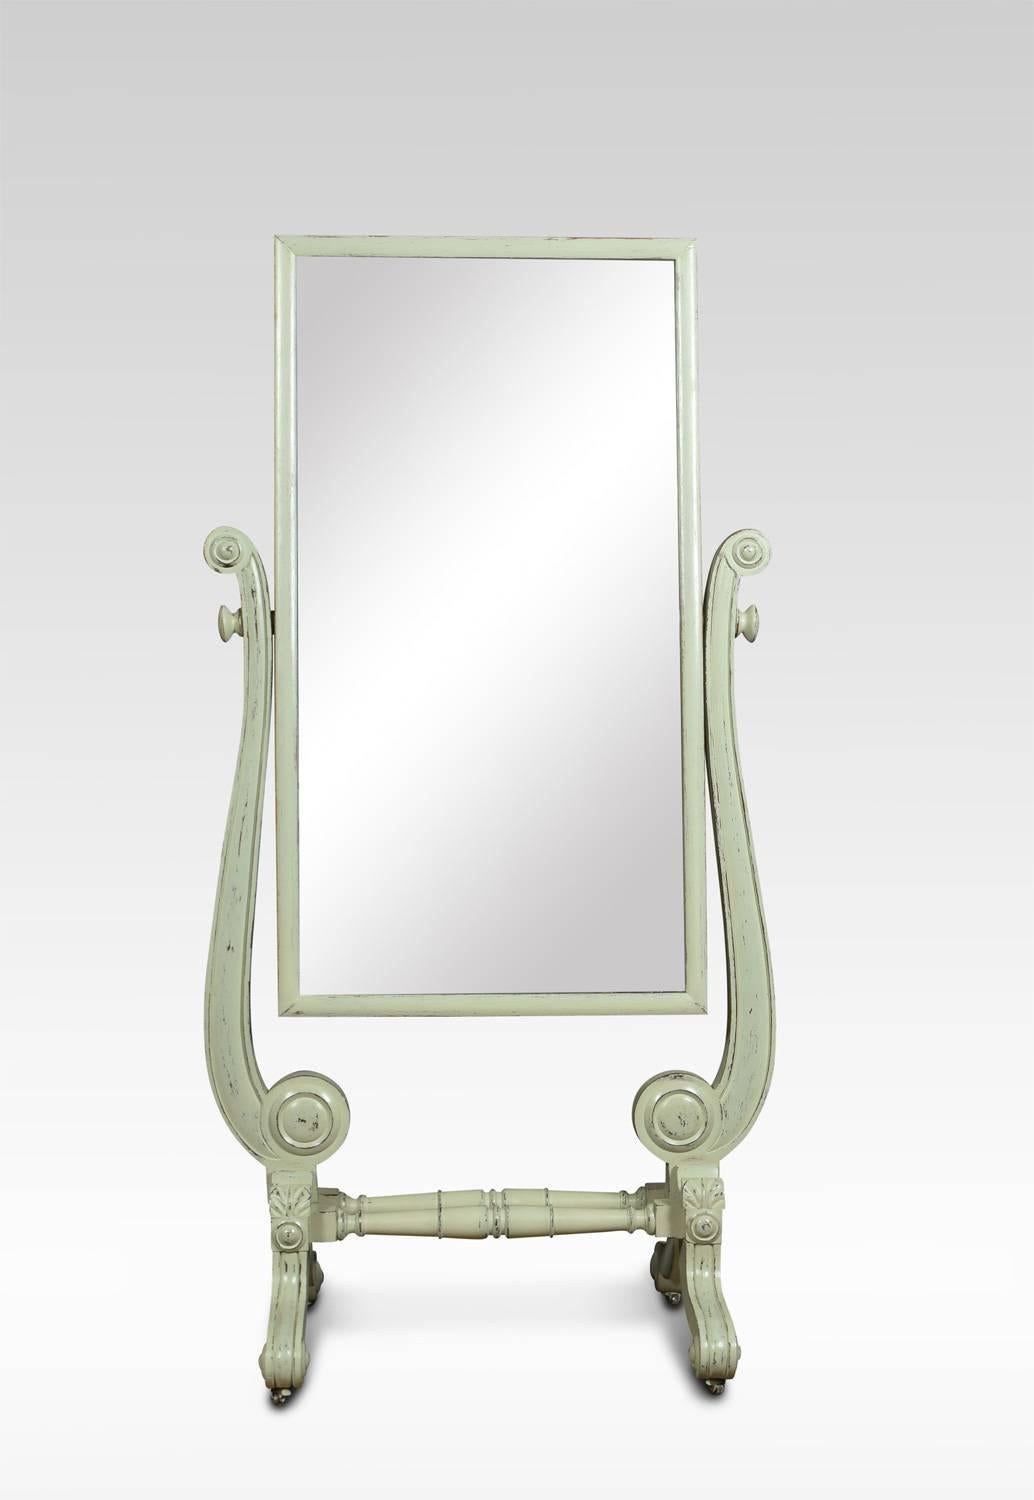 Regency painted cheval mirror, the original rectangular plate between shaped supports on scrolling feet with brass castors.

Dimensions
Height 62 inches
width 32 inches
depth 22.5 inches.